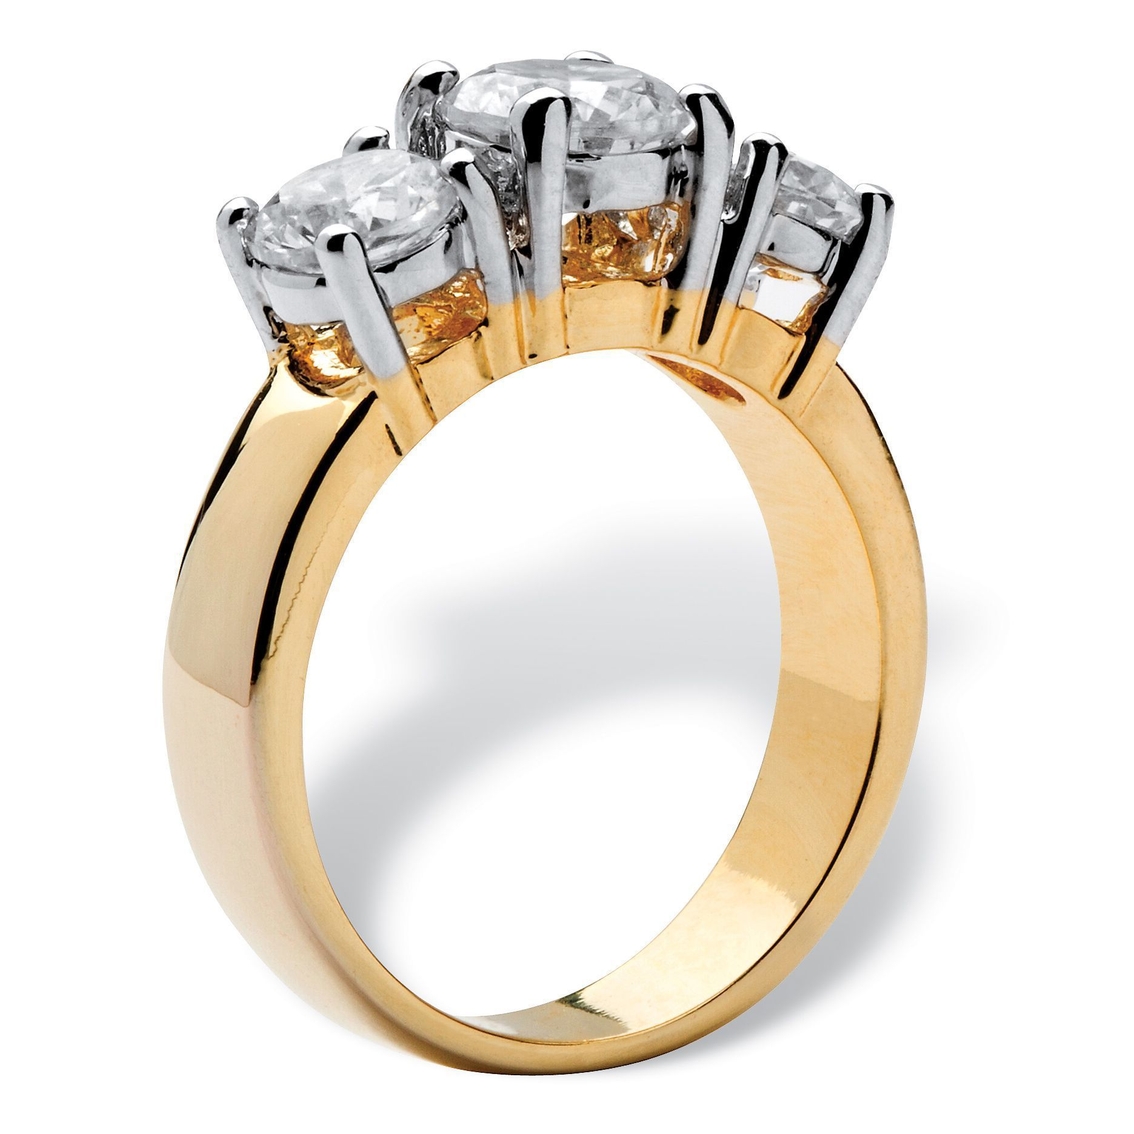 2.28 TCW Round Cubic Zirconia Three-Stone Anniversary Ring Gold-Plated - Image 2 of 5